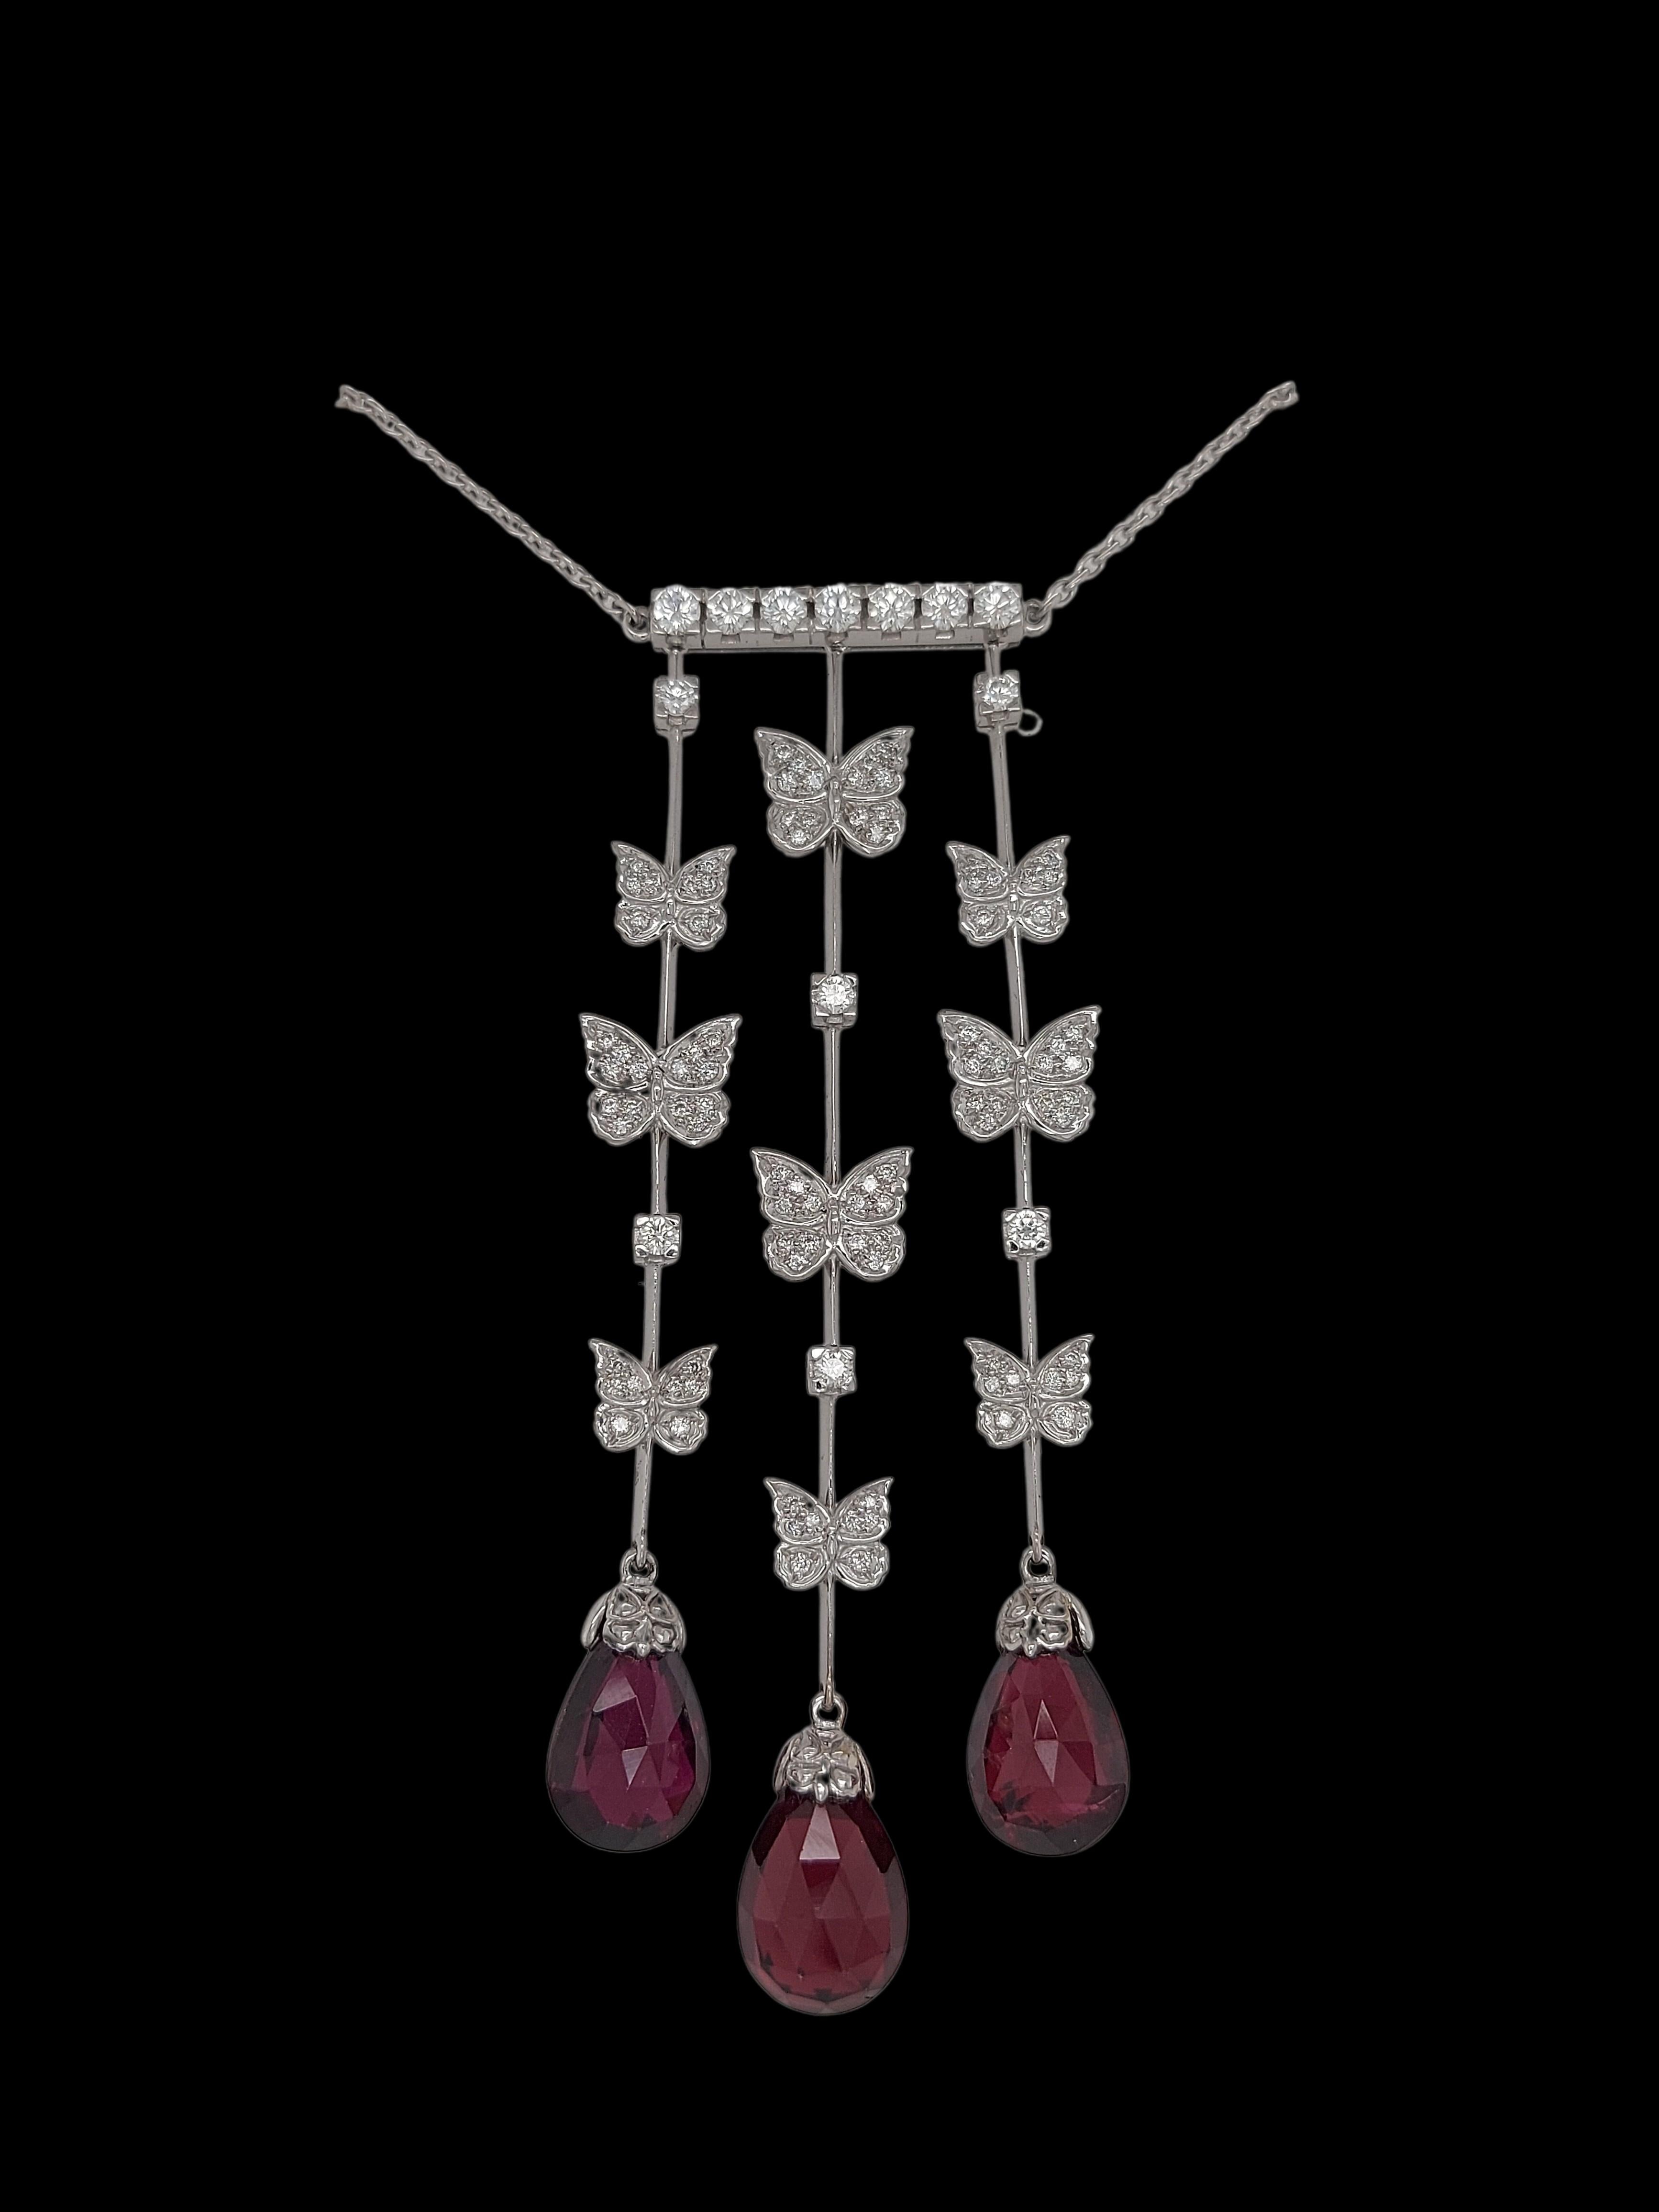 Gorgeous  18kt Gold Carrara Y Carrara pendant drop Necklace from the Butterfly Collection with Diamonds & rubelite

Can be bought with gorgeous matching earrings as seen on the photographs.

Material: 18kt White Gold 

Diamonds: Brilliant cut